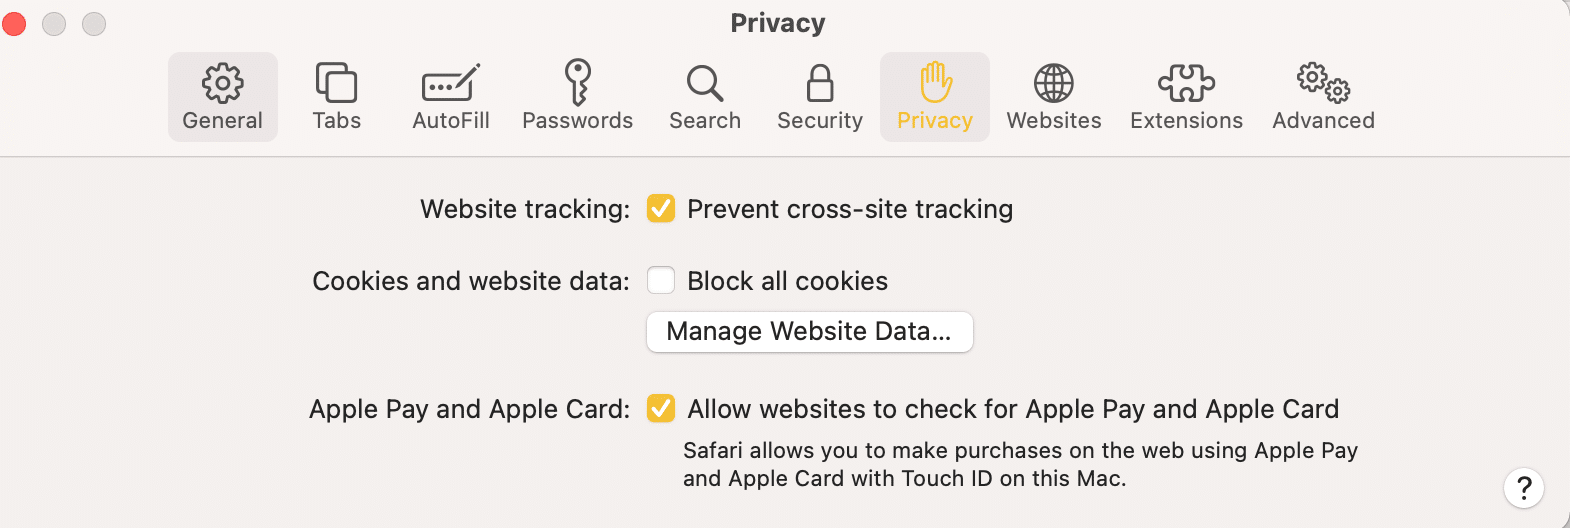 Click Privacy then, manage website data